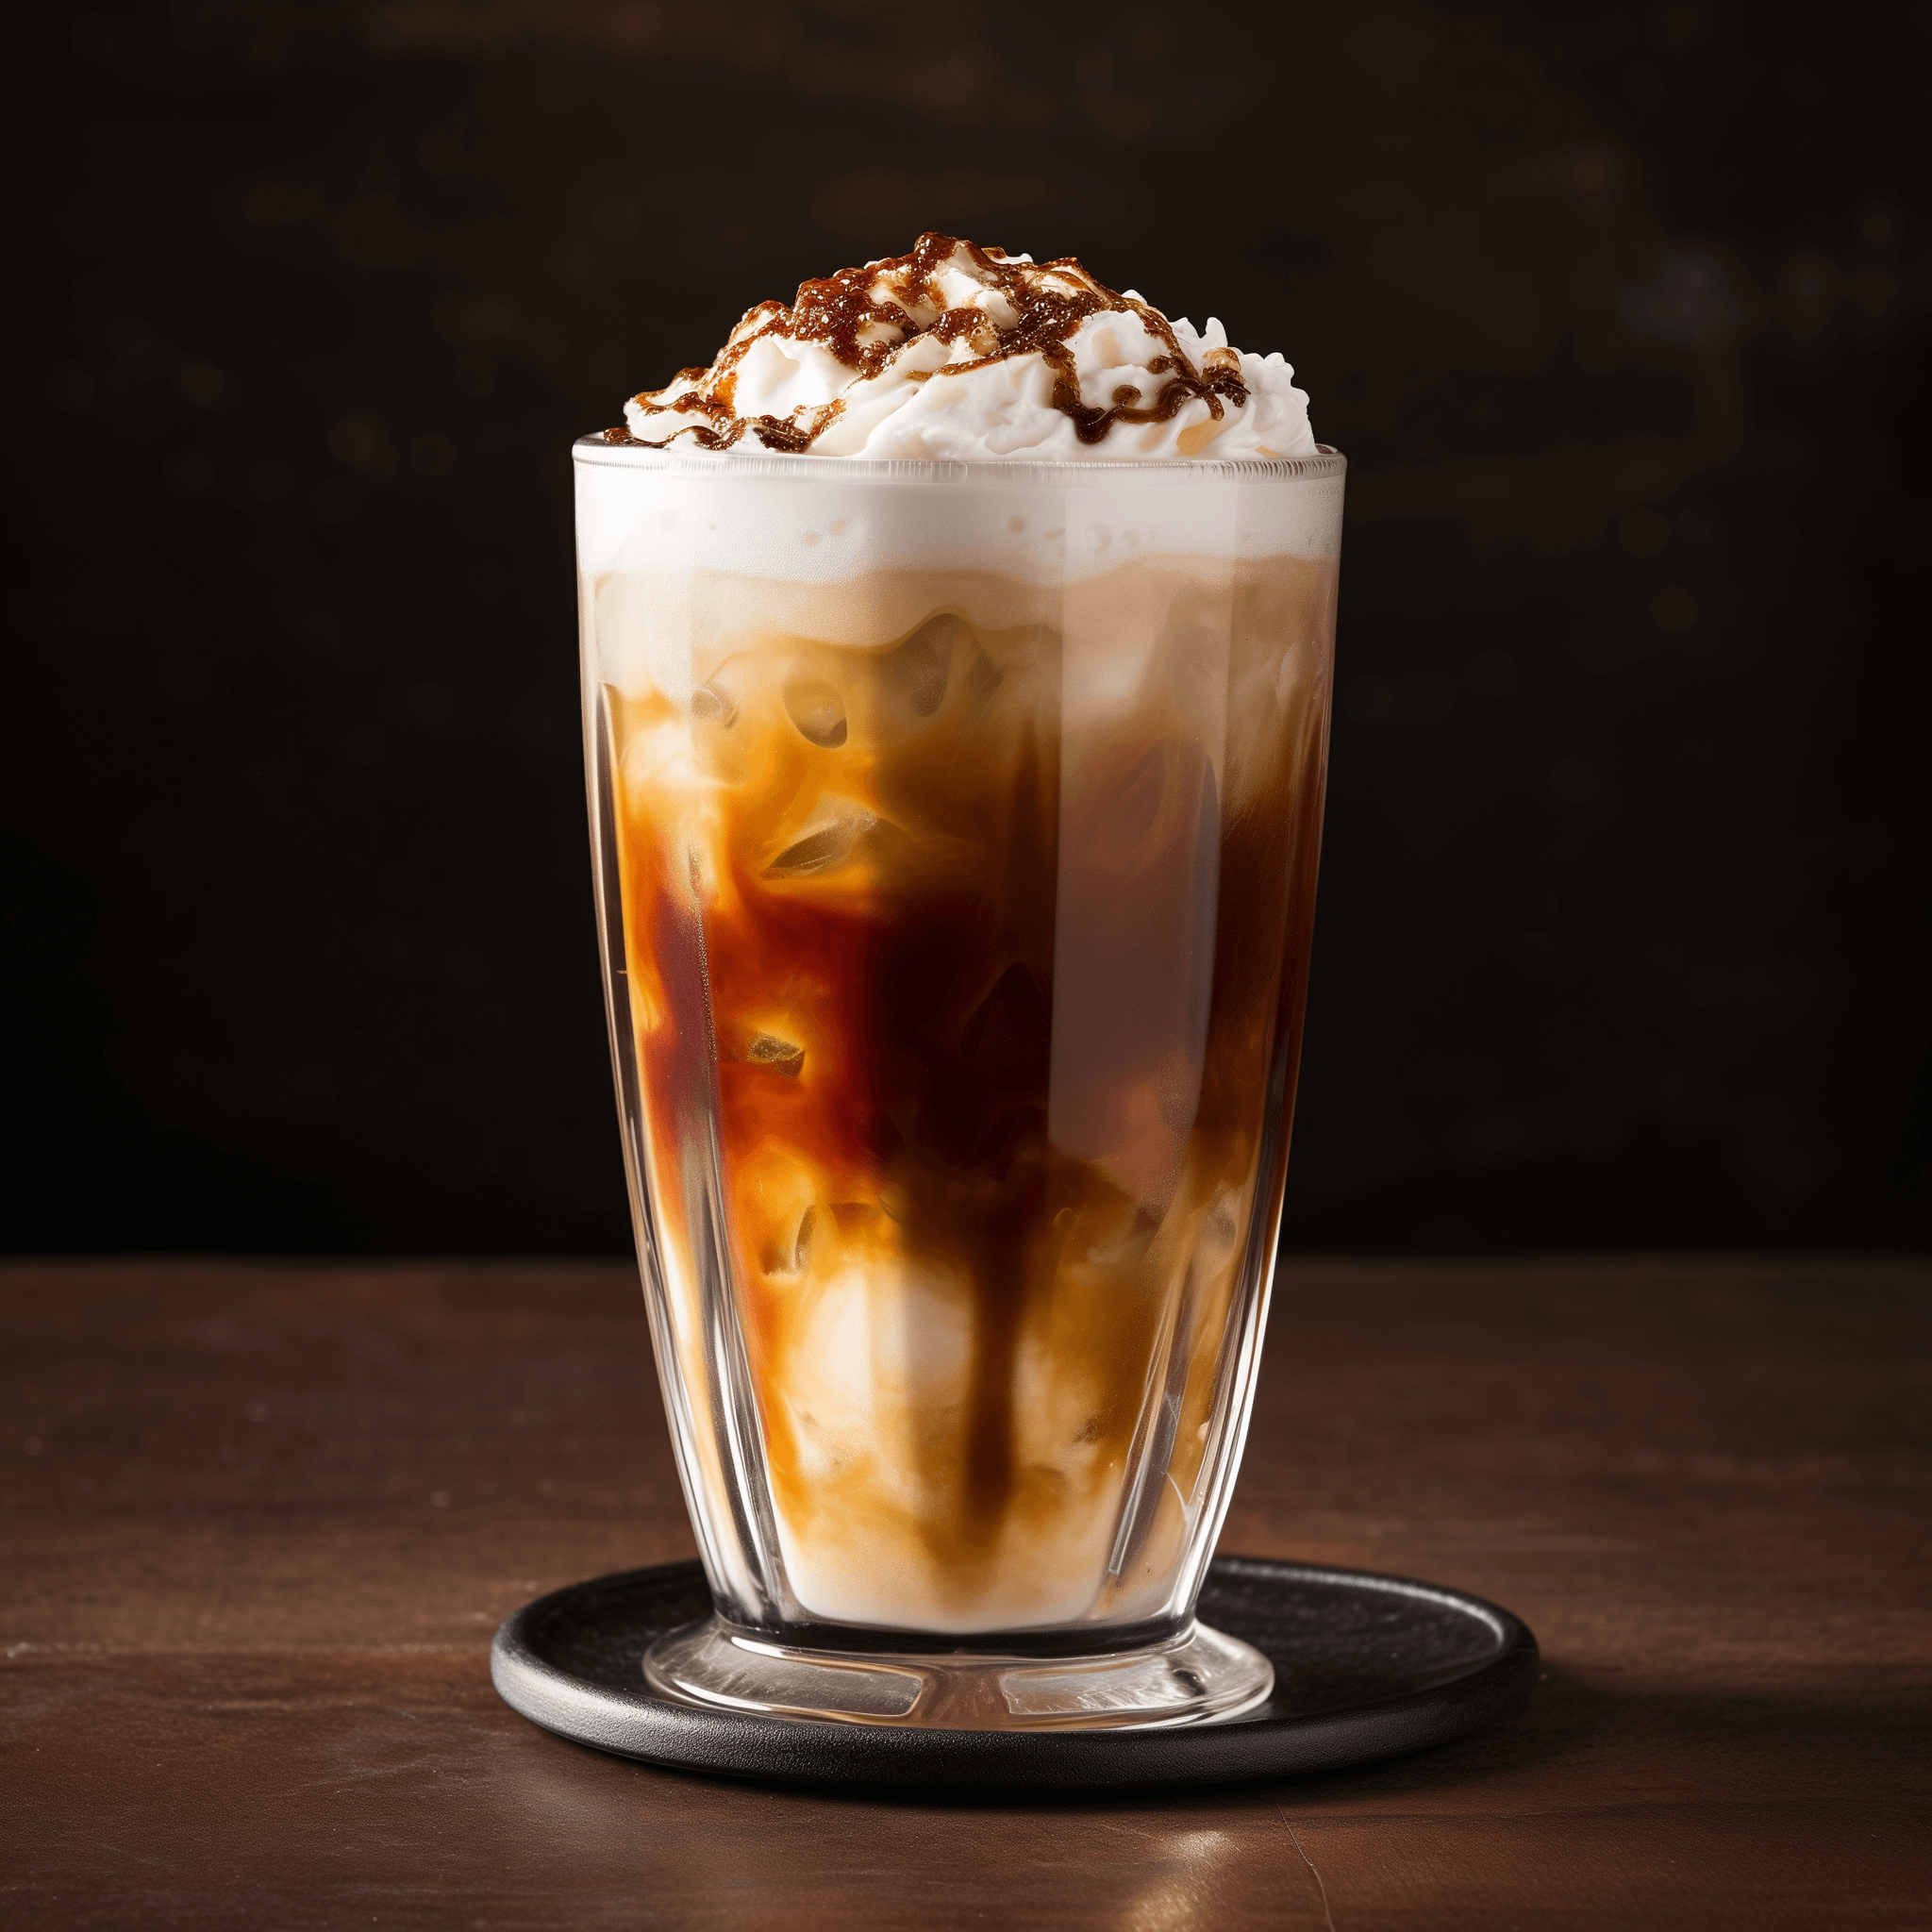 Black Cow Cocktail Recipe - The Black Cow is a delightful blend of sweet, creamy, and slightly fizzy. The vanilla ice cream gives it a smooth, rich texture, while the cola adds a refreshing fizz and sweetness. The Kahlua adds a hint of coffee flavor, making it a perfect after-dinner drink.